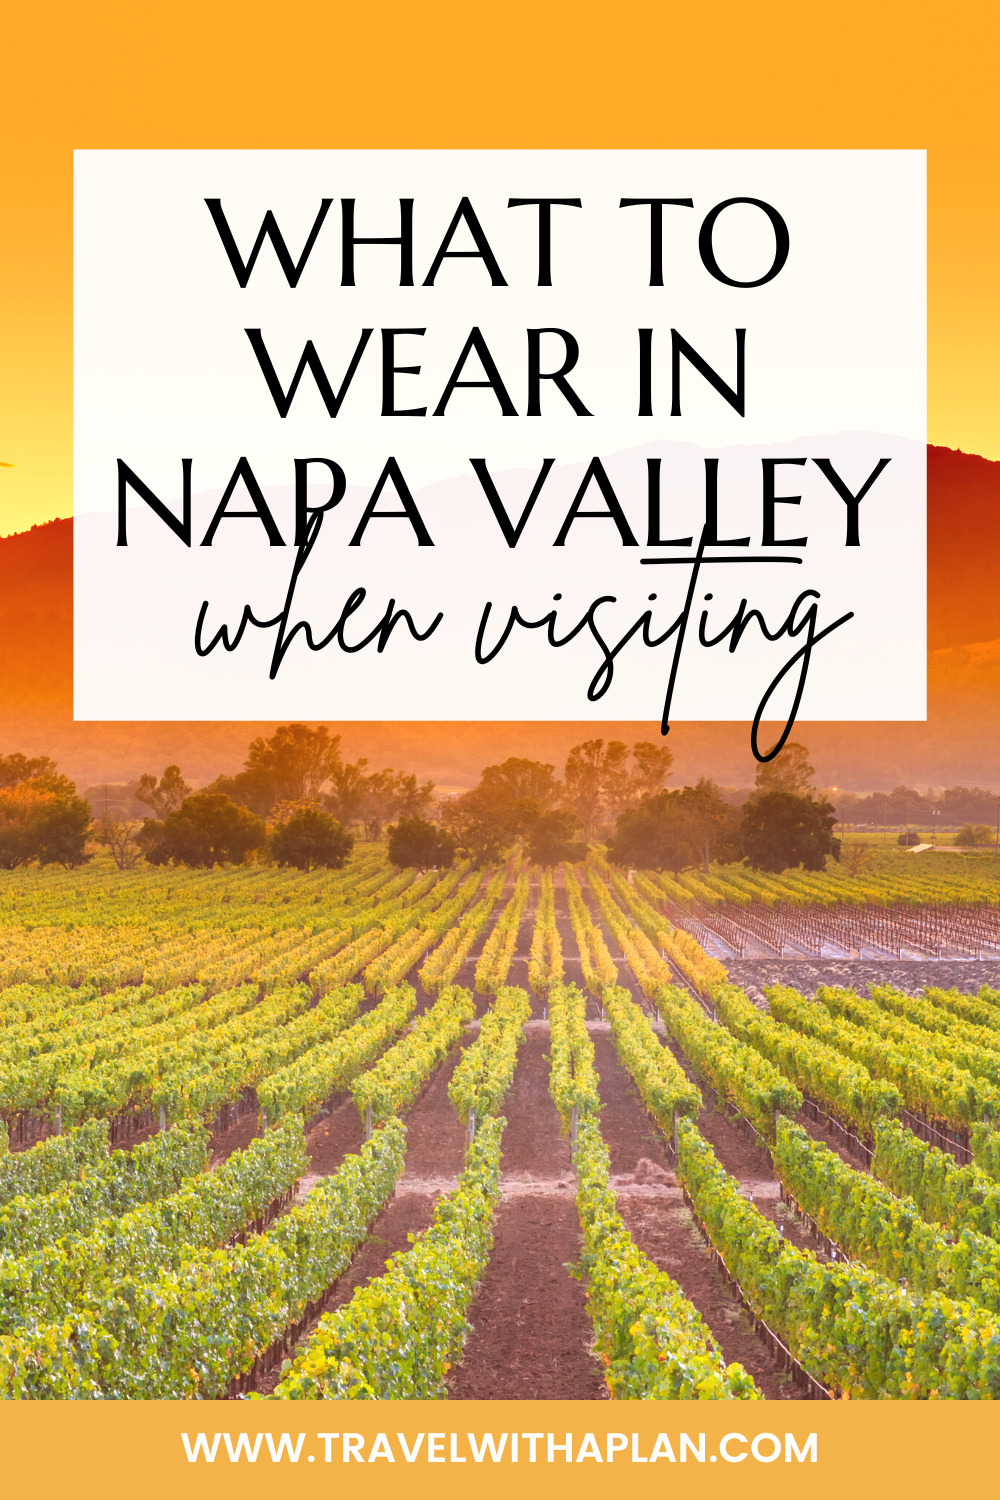 Wondering what to wear in Napa Valley while visiting, wine tasting, or vacationing there?  Check out what to wear in Napa with our outfit inspiration for all seasons!  We've got you covered with this guide to Napa outfits!  #Napa #winecountry #travelfashion